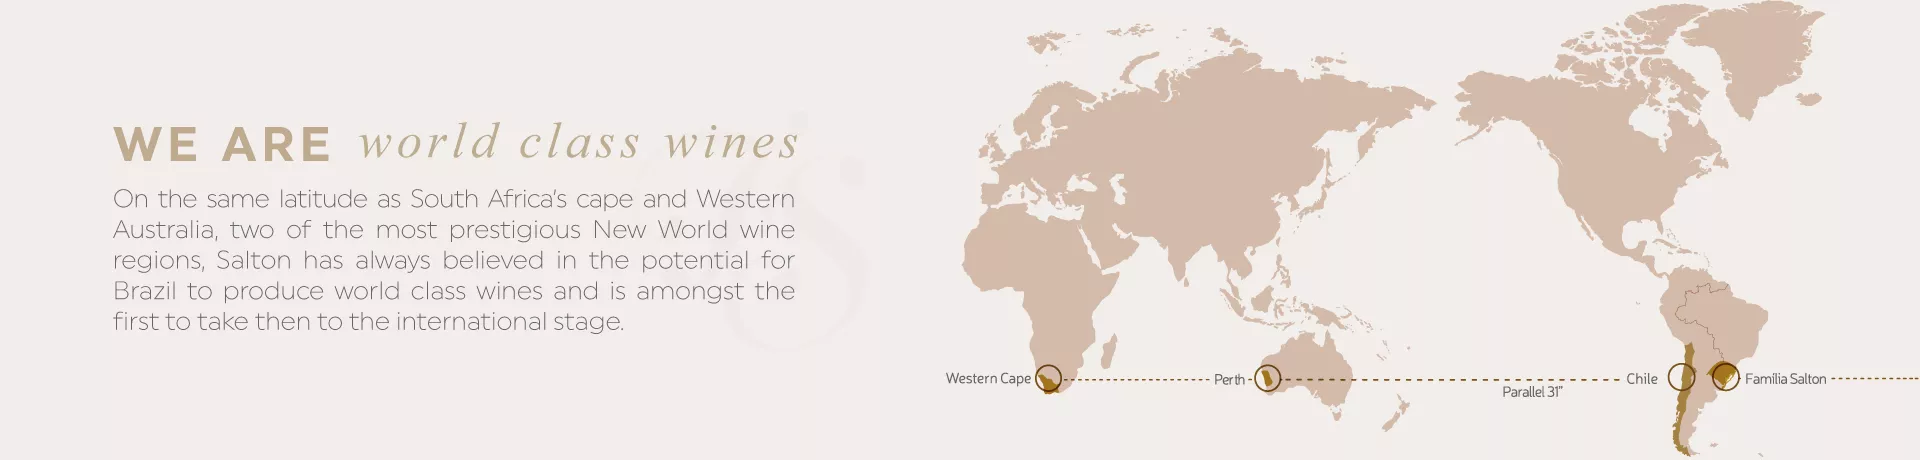 WE ARE world class wines